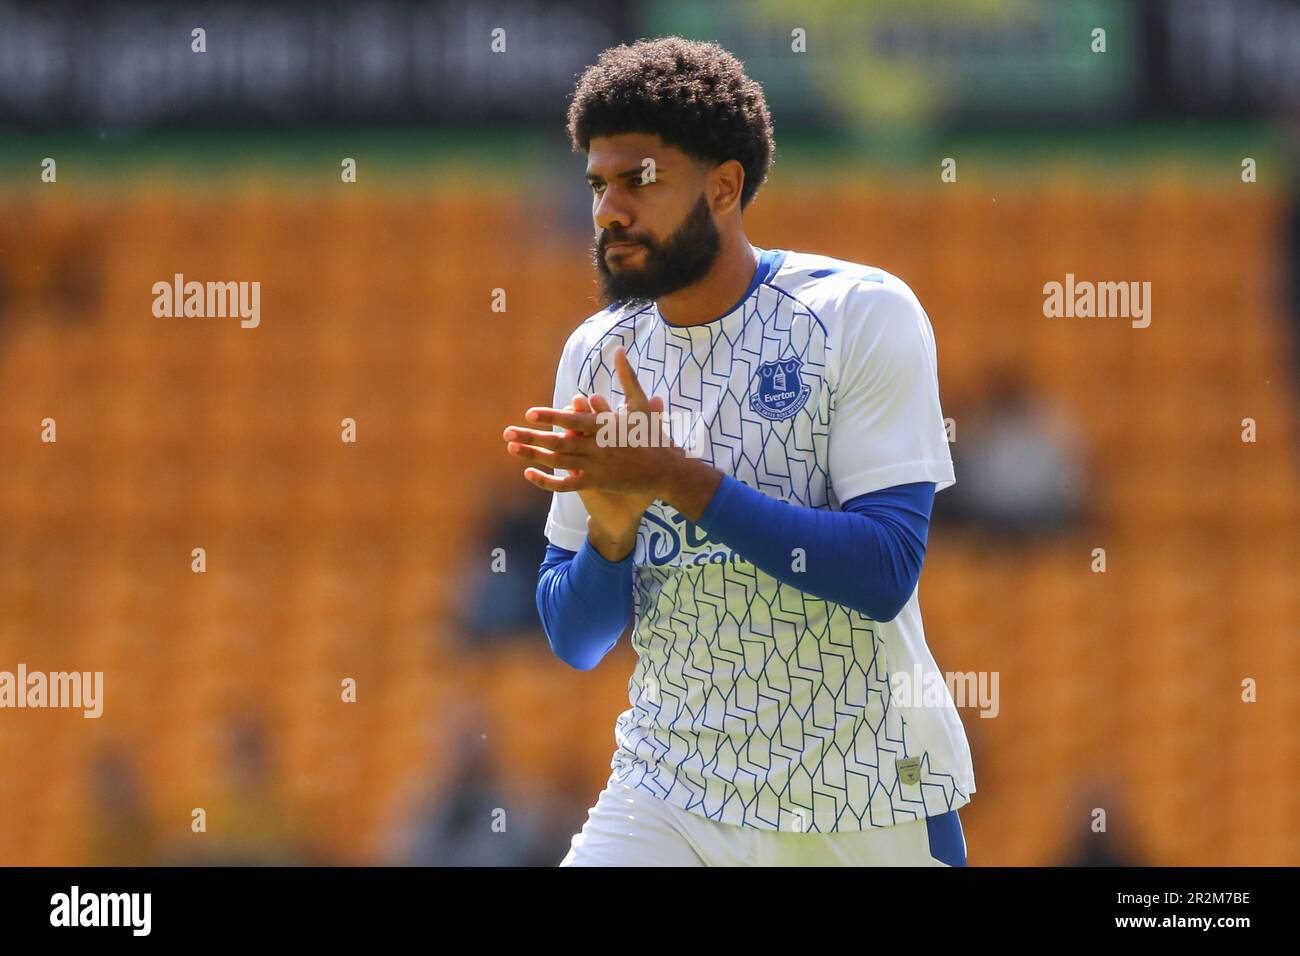 Ellis Simms #50 of Everton in the pregame warmup session during the Premier League match Wolverhampton Wanderers vs Everton at Molineux, Wolverhampton, United Kingdom, 20th May 2023  (Photo by Gareth Evans/News Images) Stock Photo